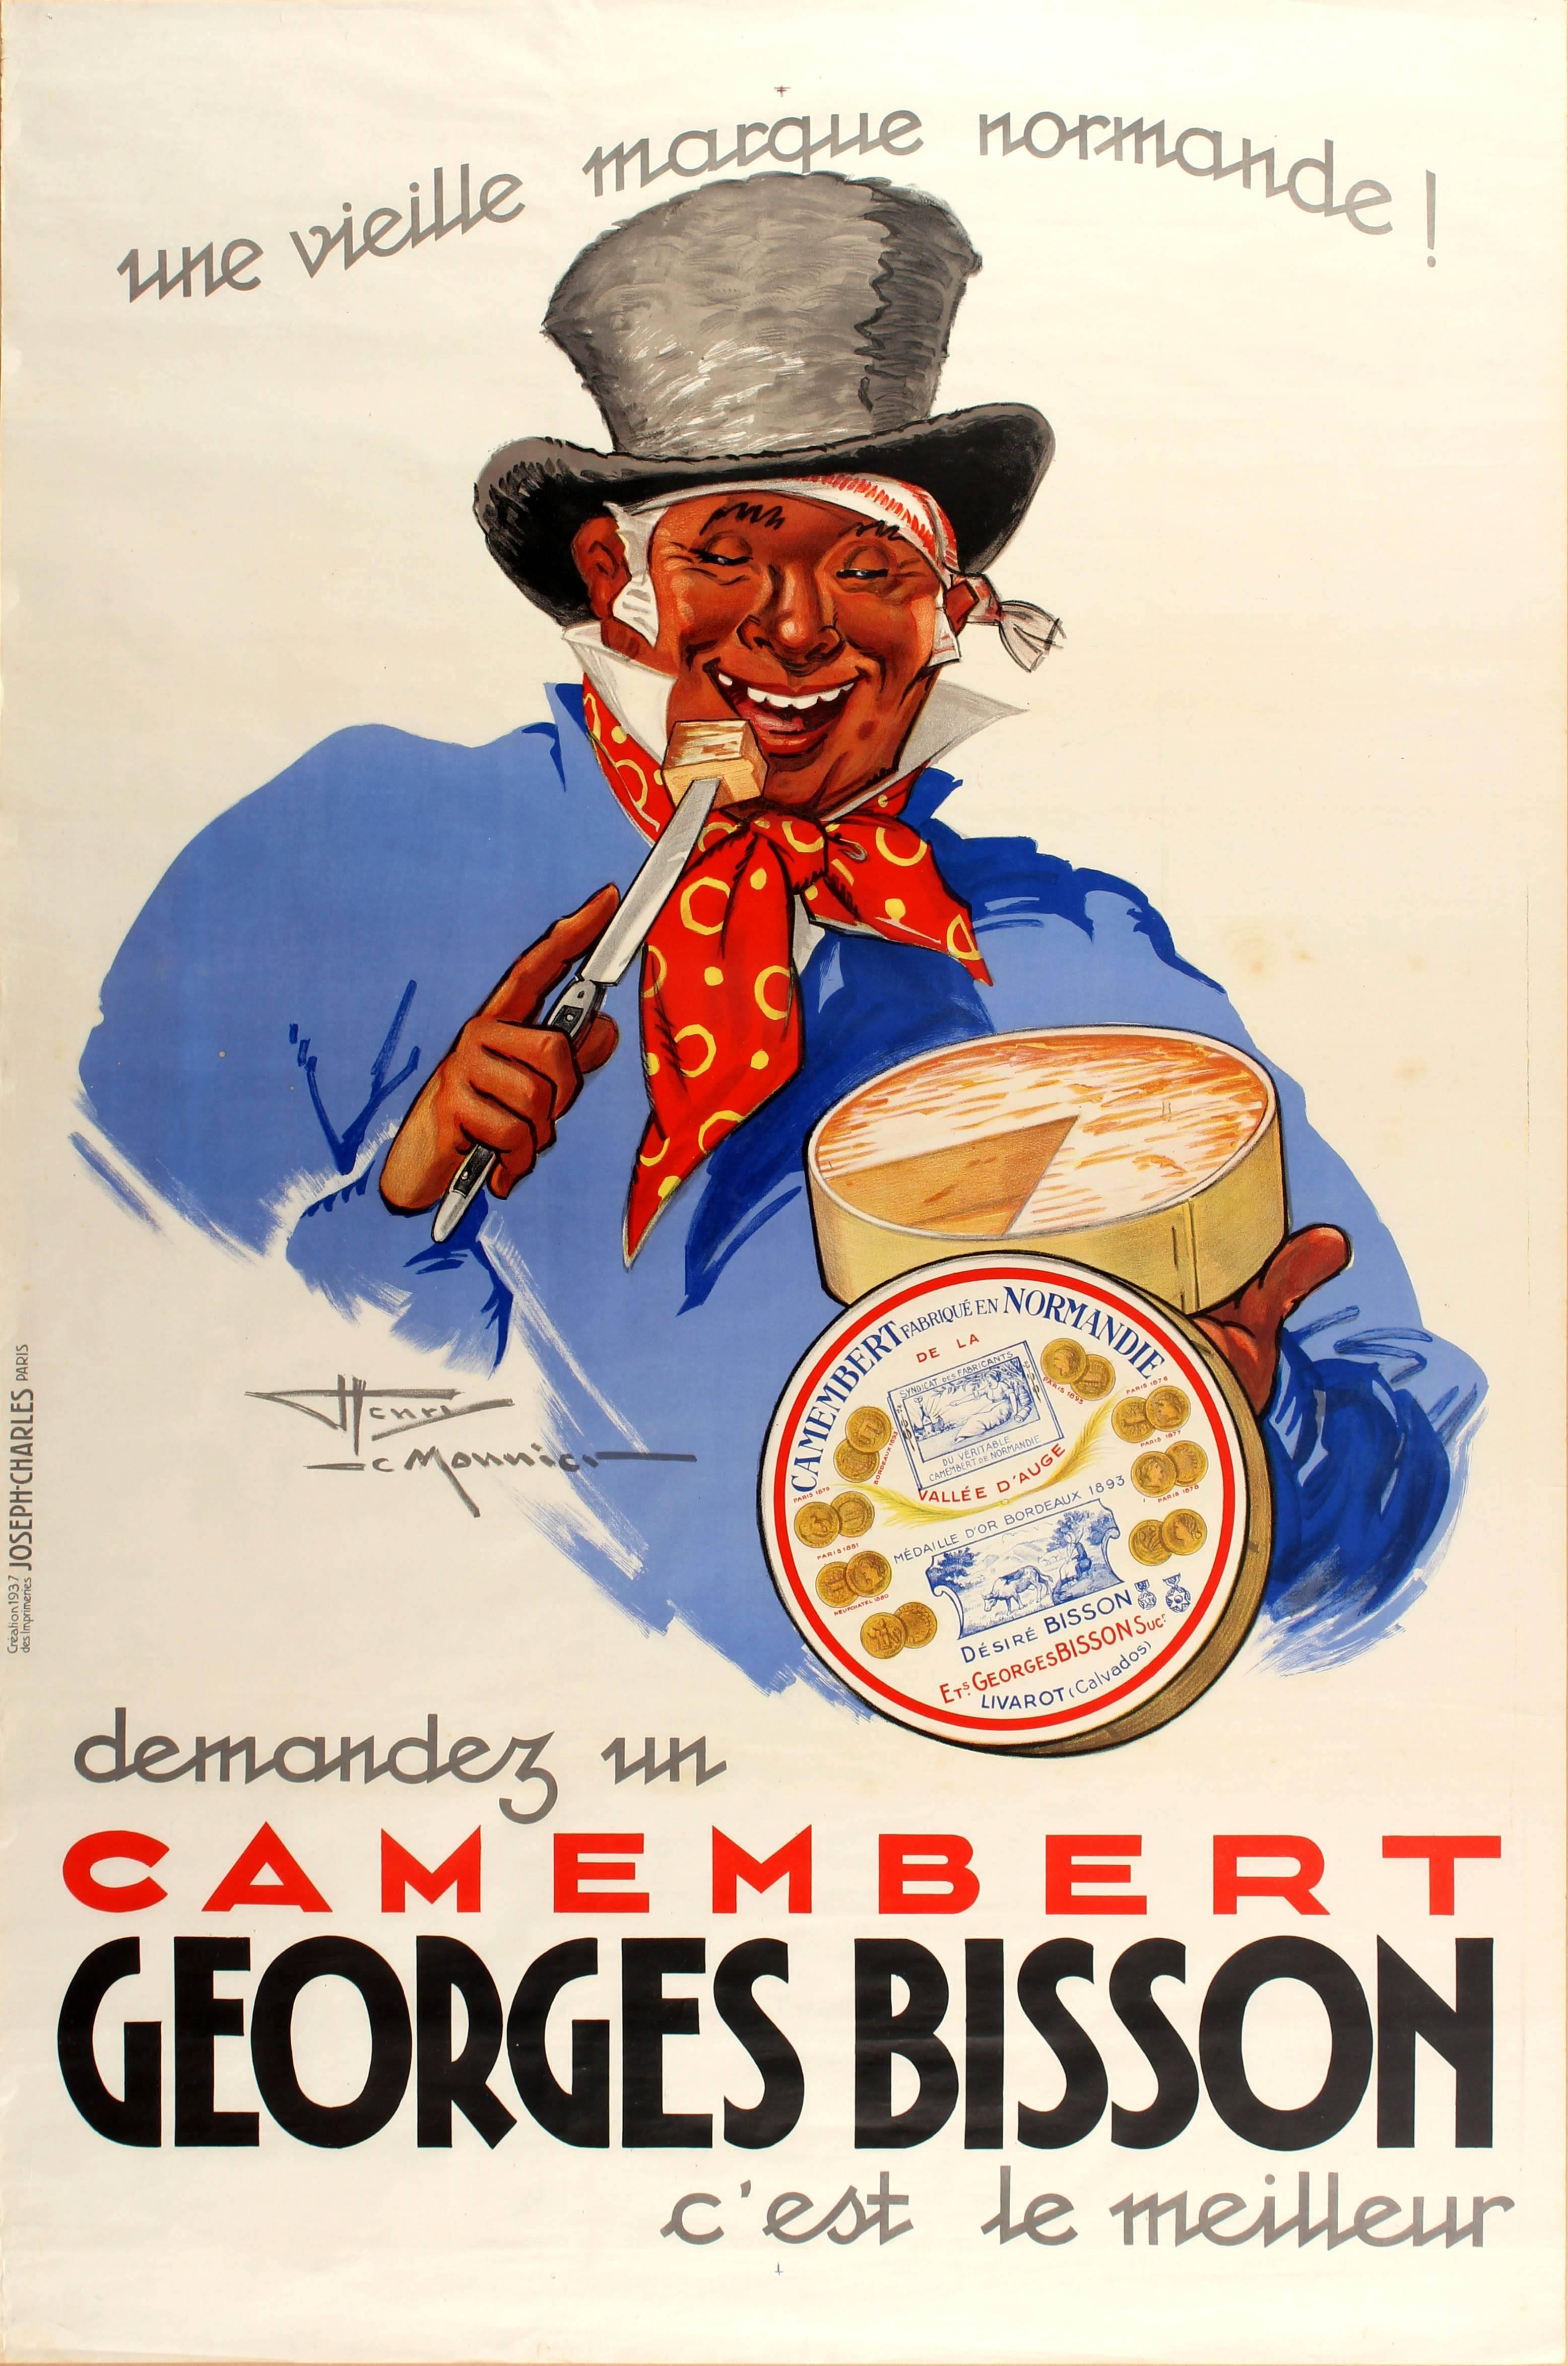 Henry Le Monnier Print - Original Vintage Food Poster Advertising Georges Bisson Camembert Cheese France